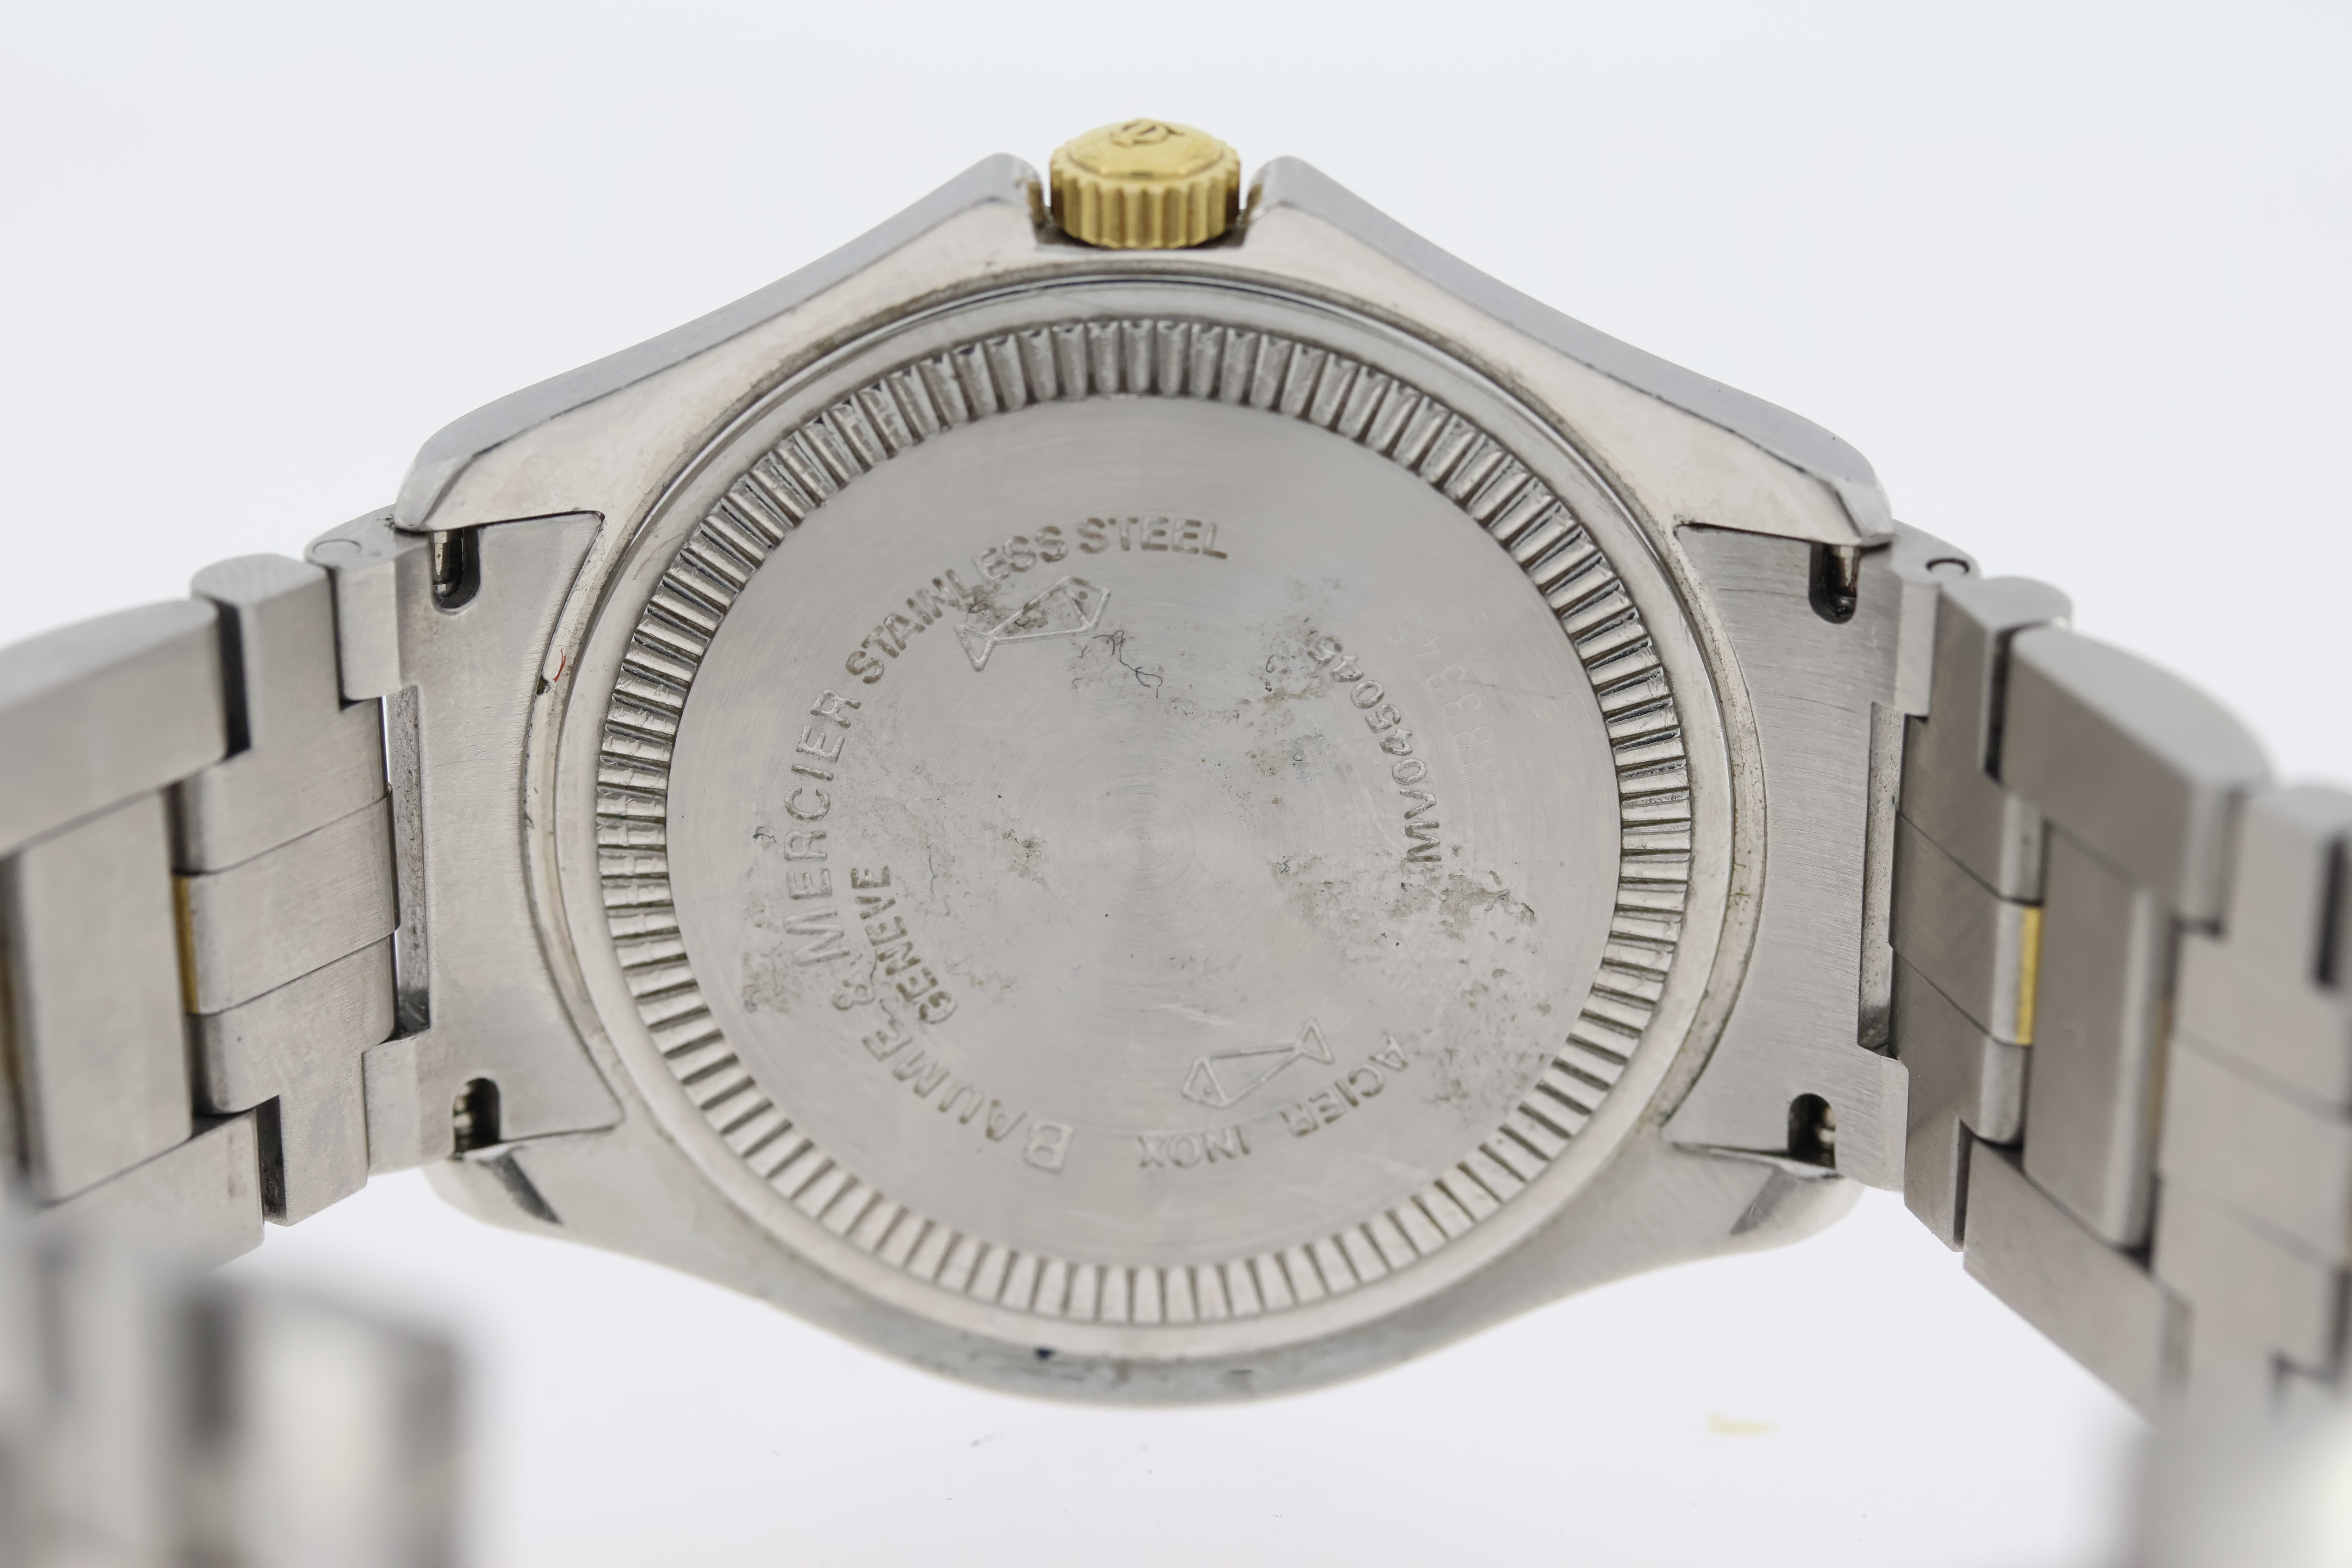 BAUME & MERCIER MALIBU QUARTZ WATCH REFERENCE MV045045. Approx 35mm stainless steel case with a - Image 4 of 4